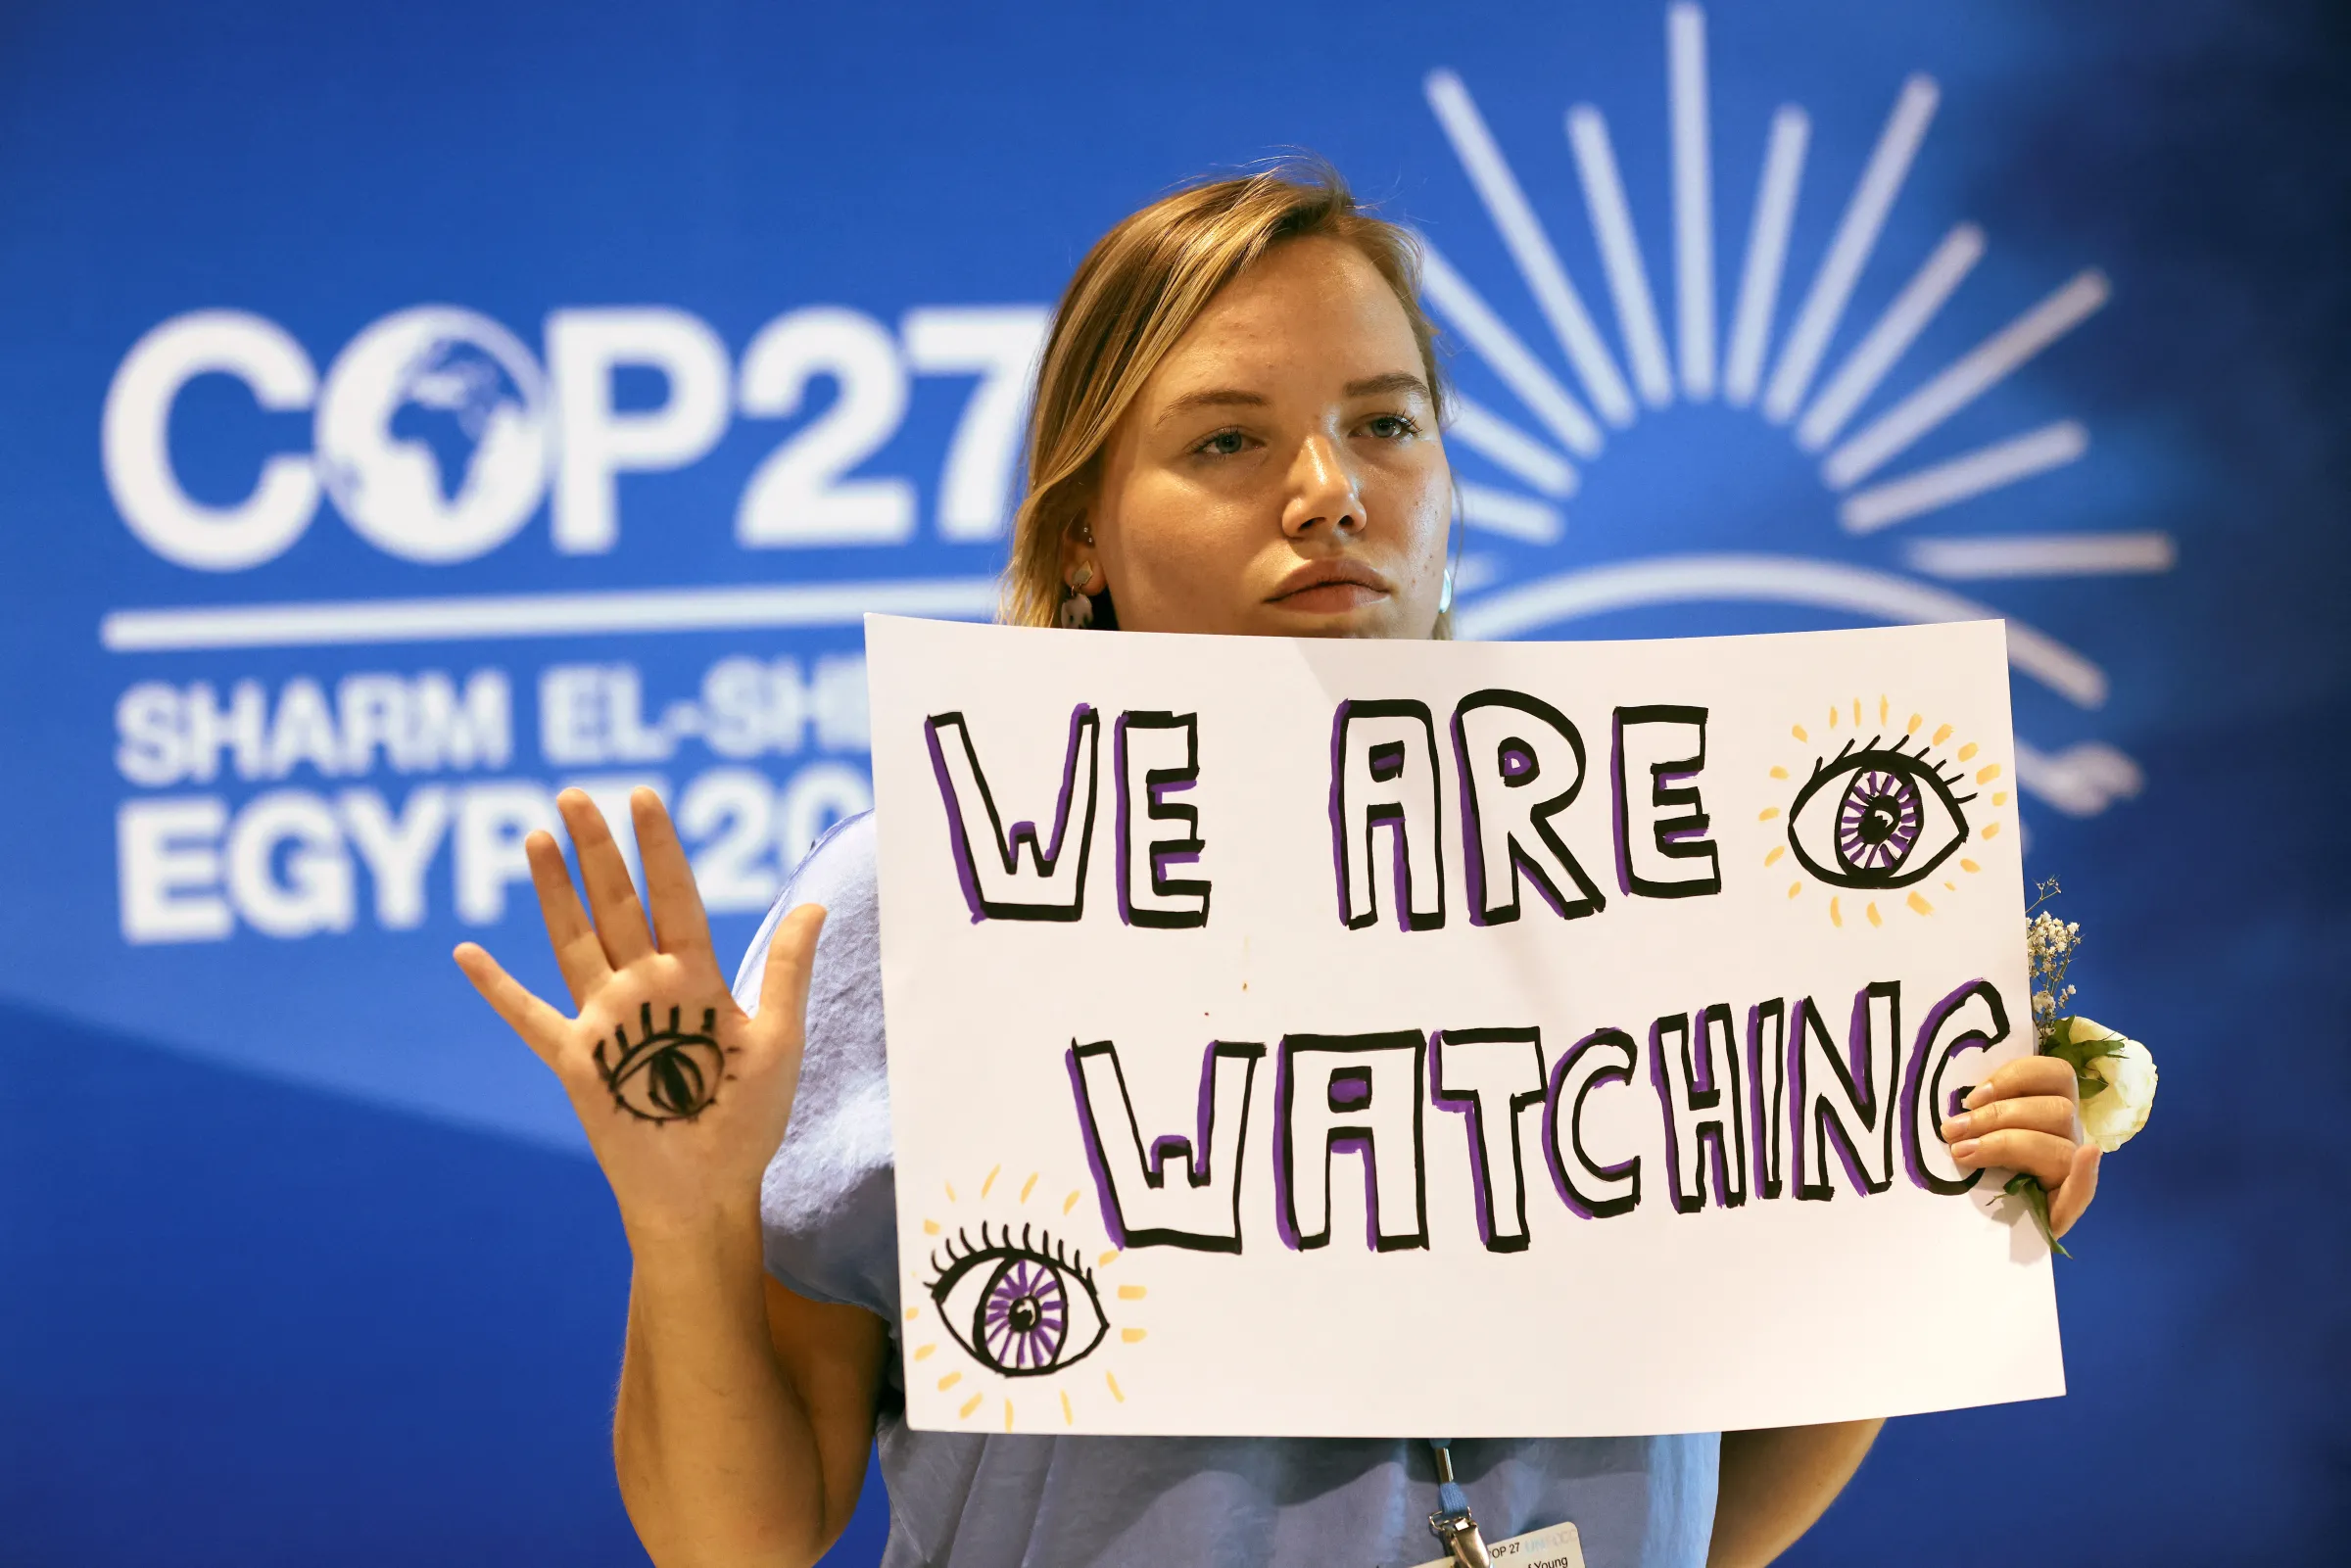 A climate activist takes part in a protest, during the COP27 climate summit, in Sharm el-Sheikh, Egypt, November 19, 2022. REUTERS/Mohamed Abd El Ghany